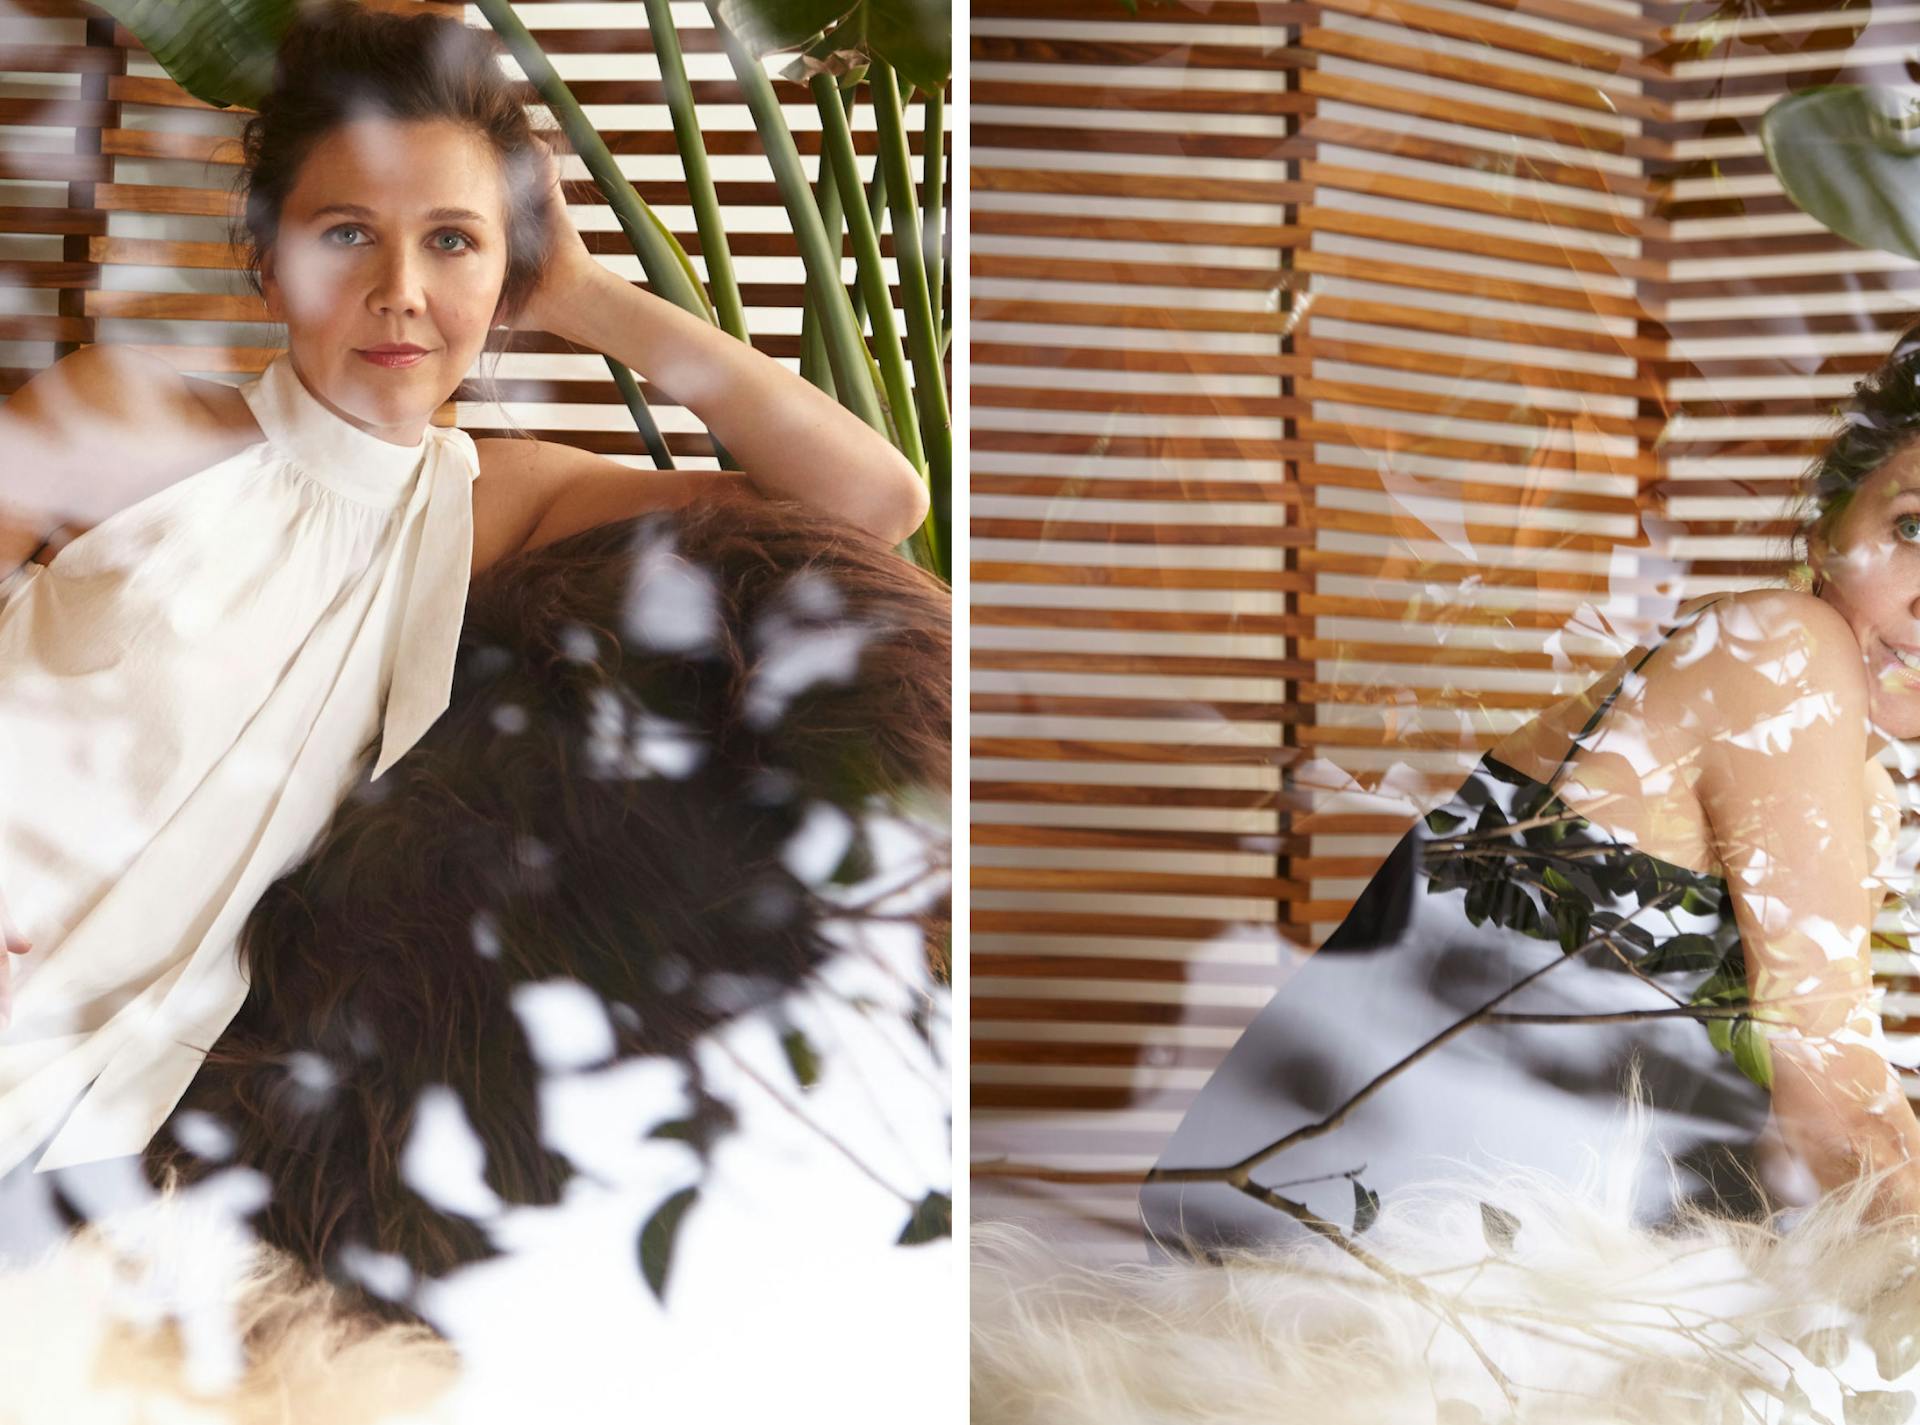 Two images. First shows Maggie Gyllenhaal wearing white and sitting on a chair. Second shows Maggie Gyllenhaal wearing black sitting away from the camera.